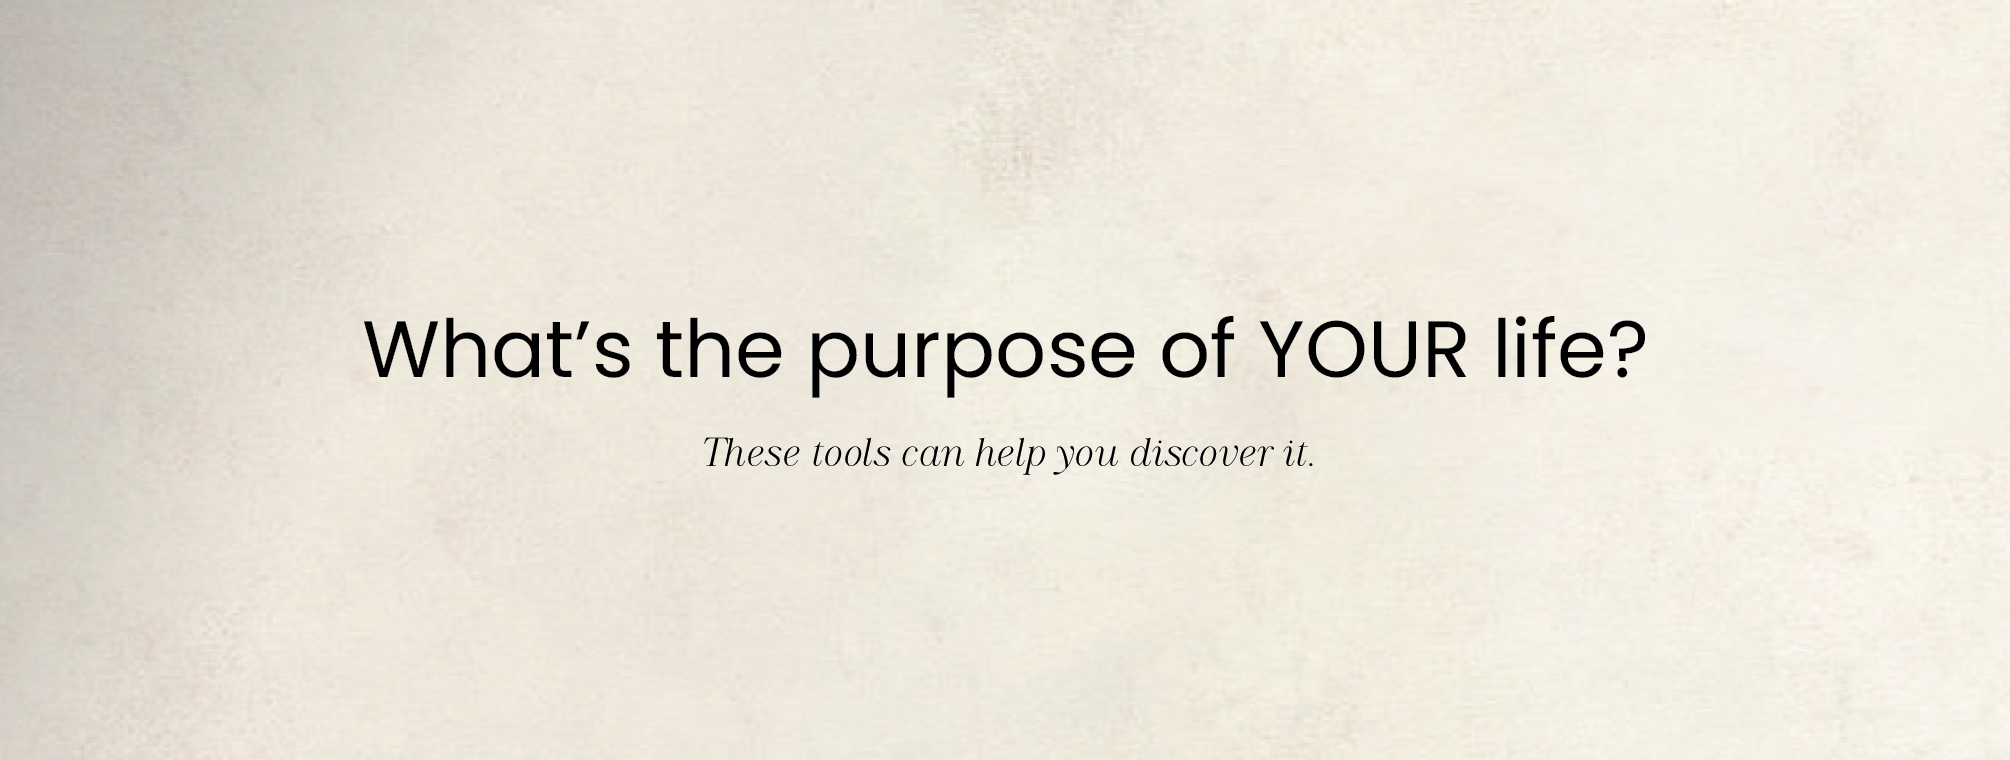 What's the purpose of YOUR life?